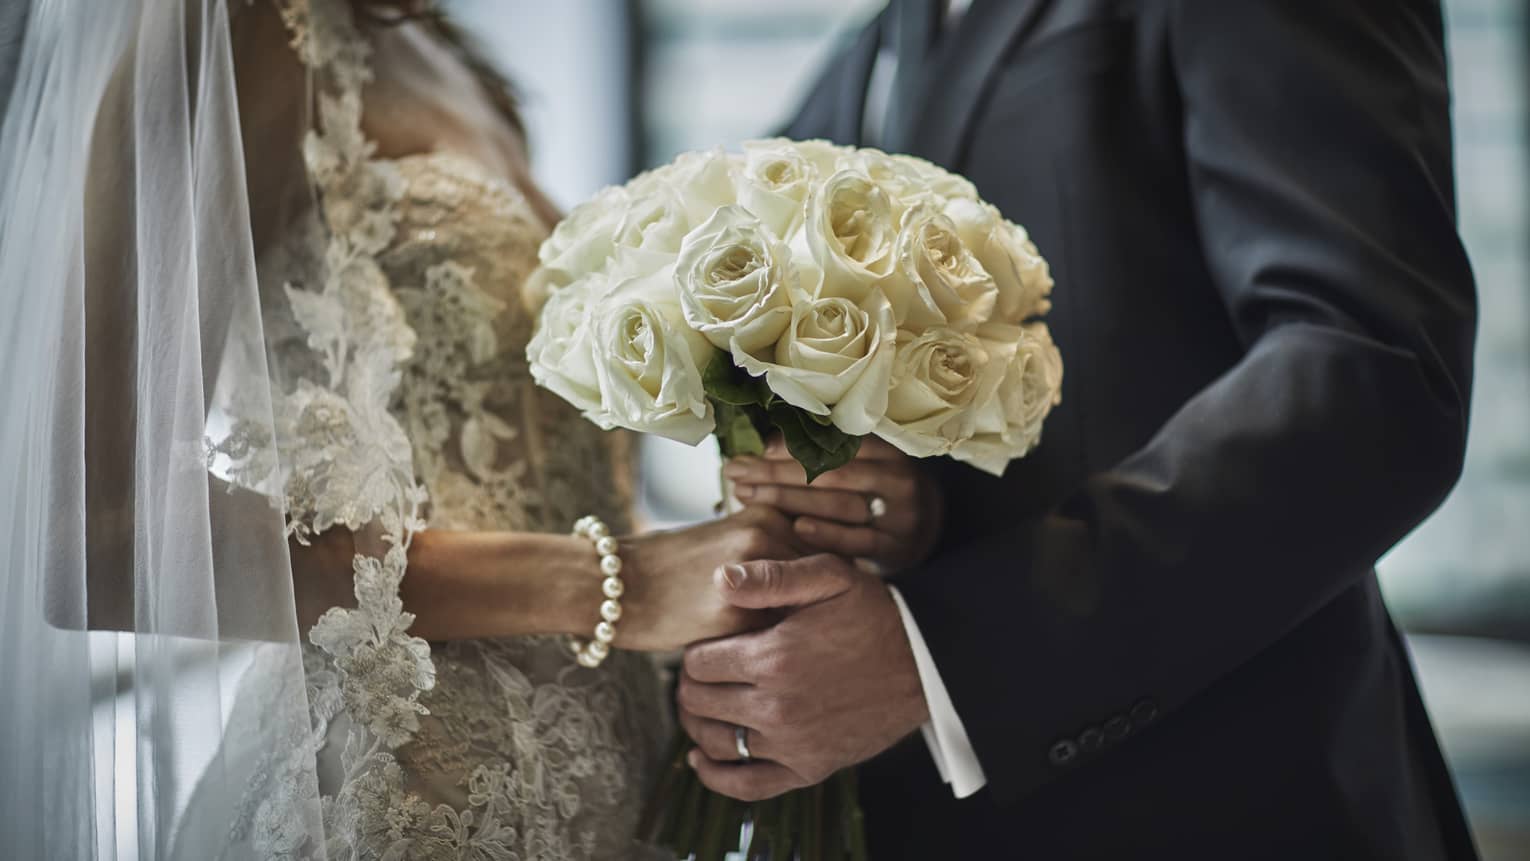 A close up of a bride in a lace gown and a groom in a gray suit hold the bride's bouquet of white roses together.